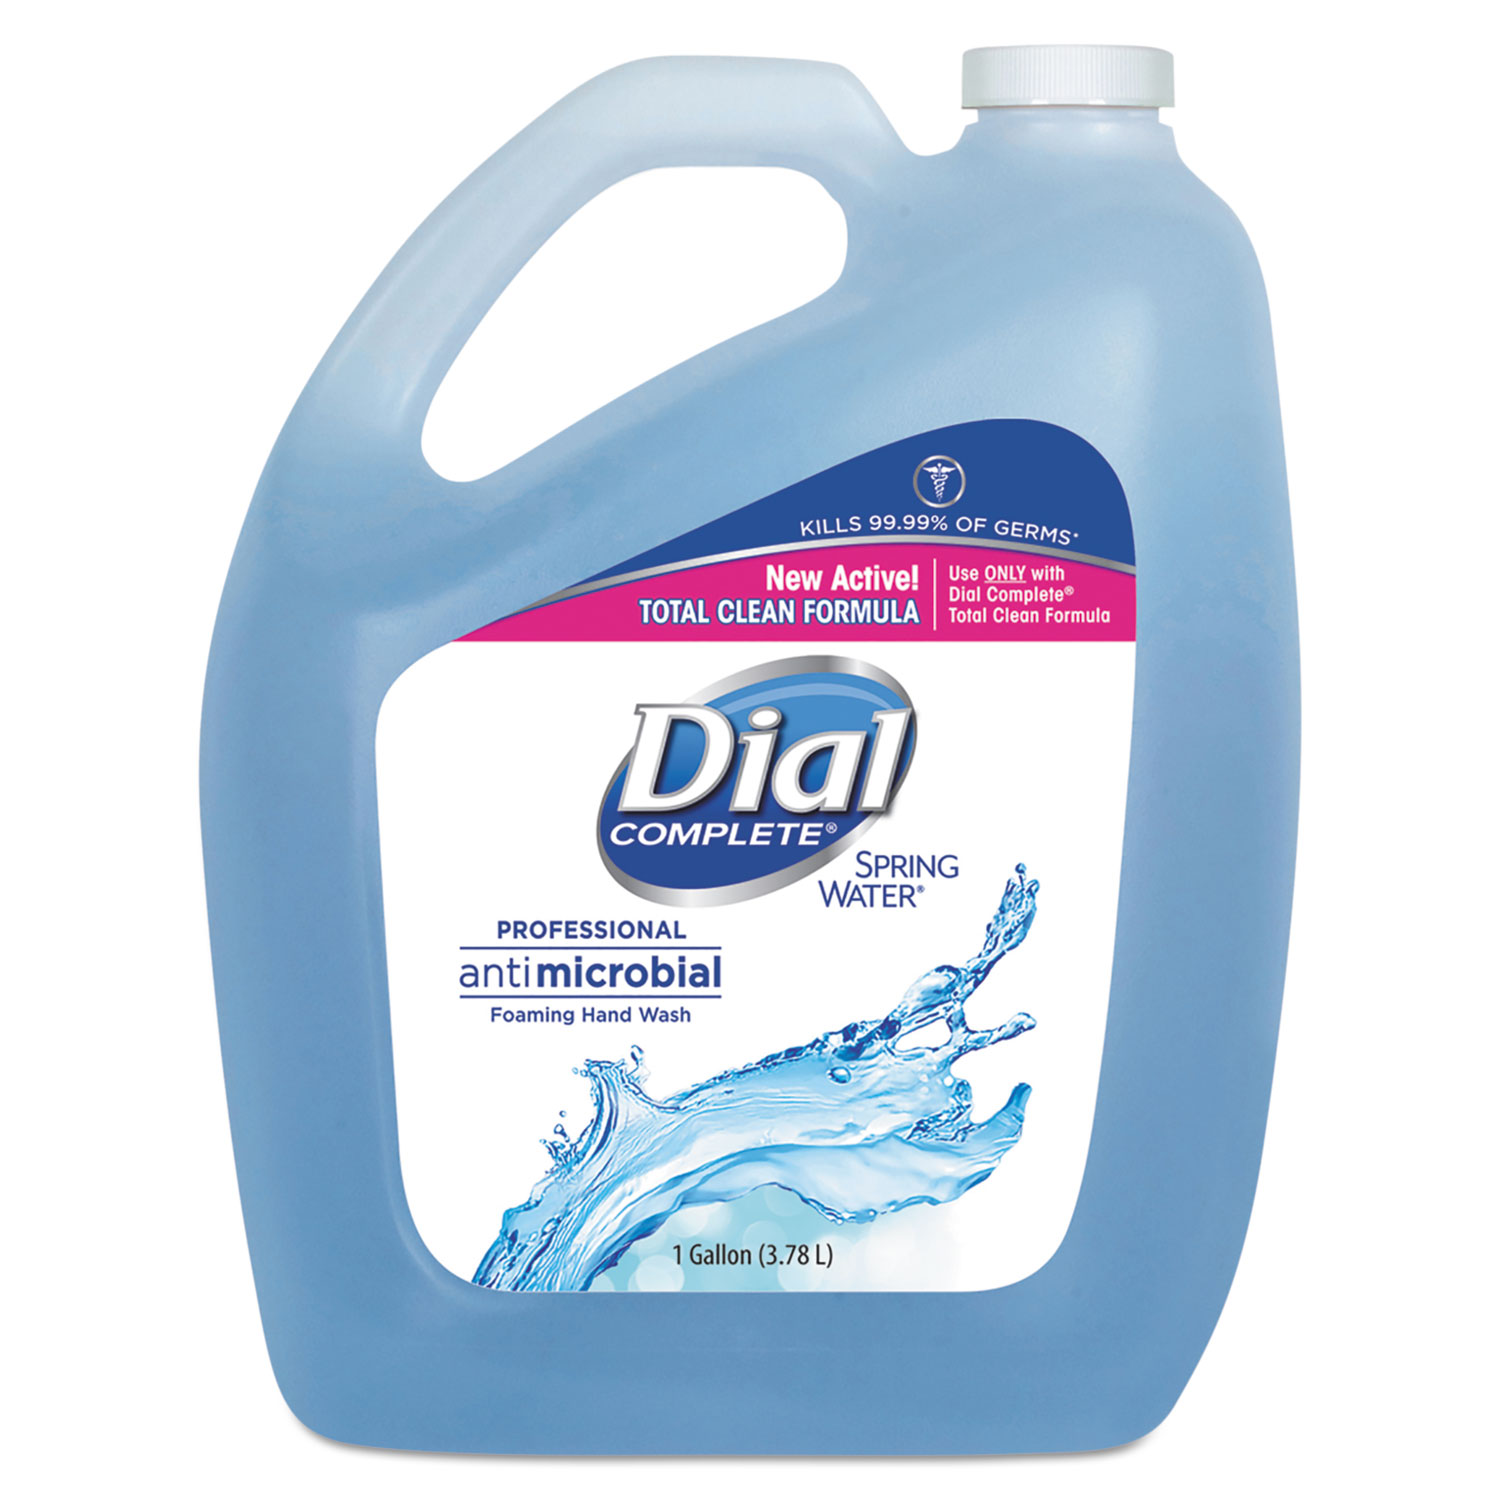  Dial Professional DIA15922EA Antimicrobial Foaming Hand Wash, Spring Water, 1 gal Bottle (DIA15922EA) 